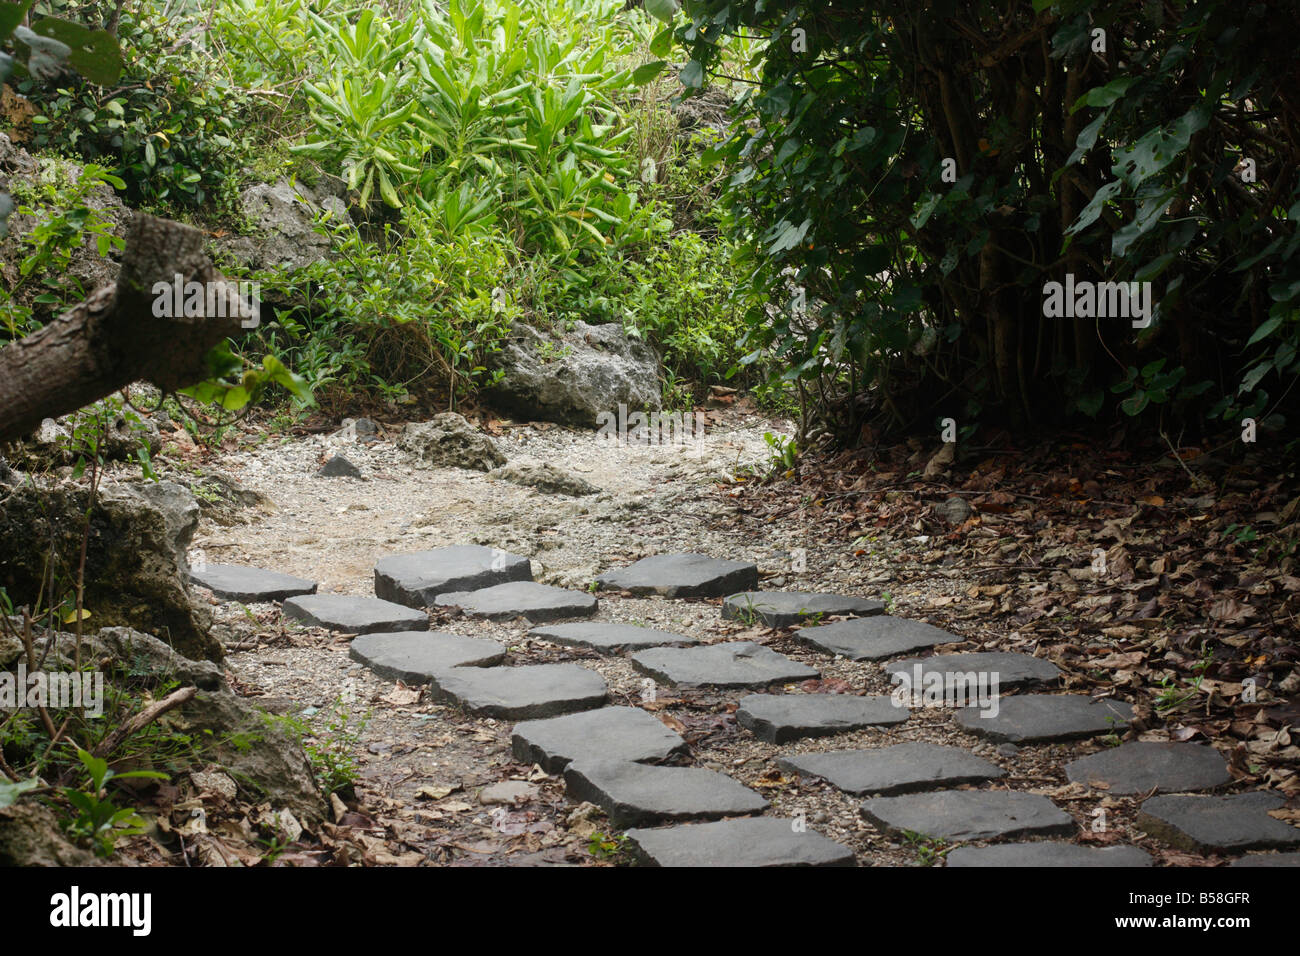 Abrupt end of a footpath in a tropical forest. Stock Photo